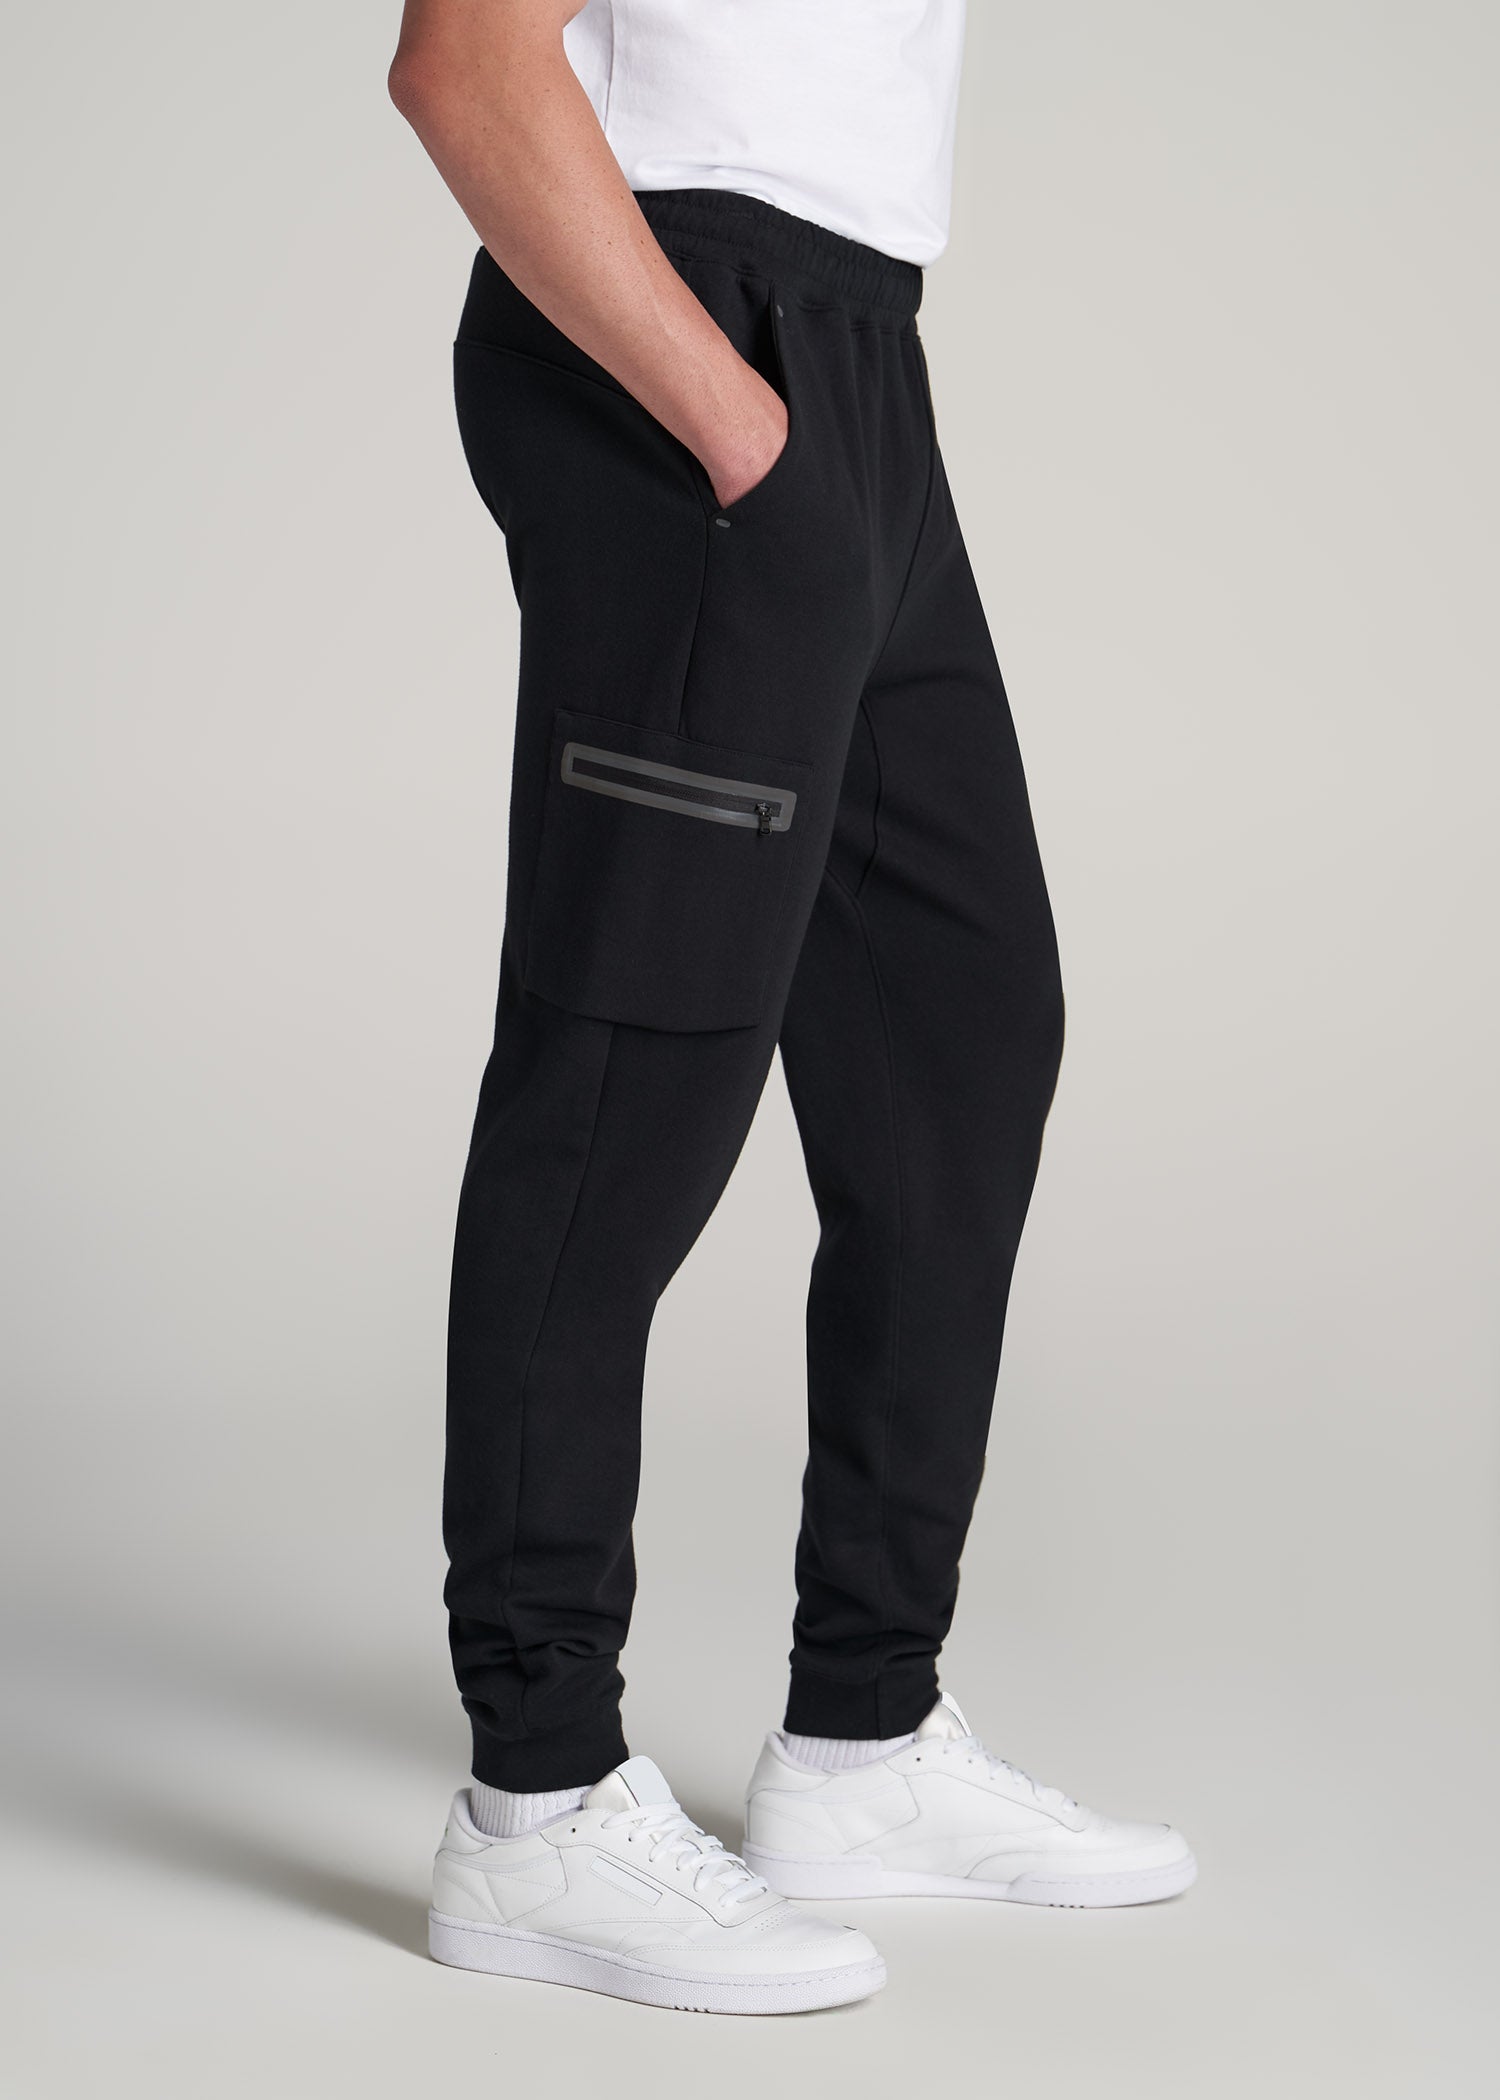 Black Utility Cargo Joggers For Tall Men, American Tall